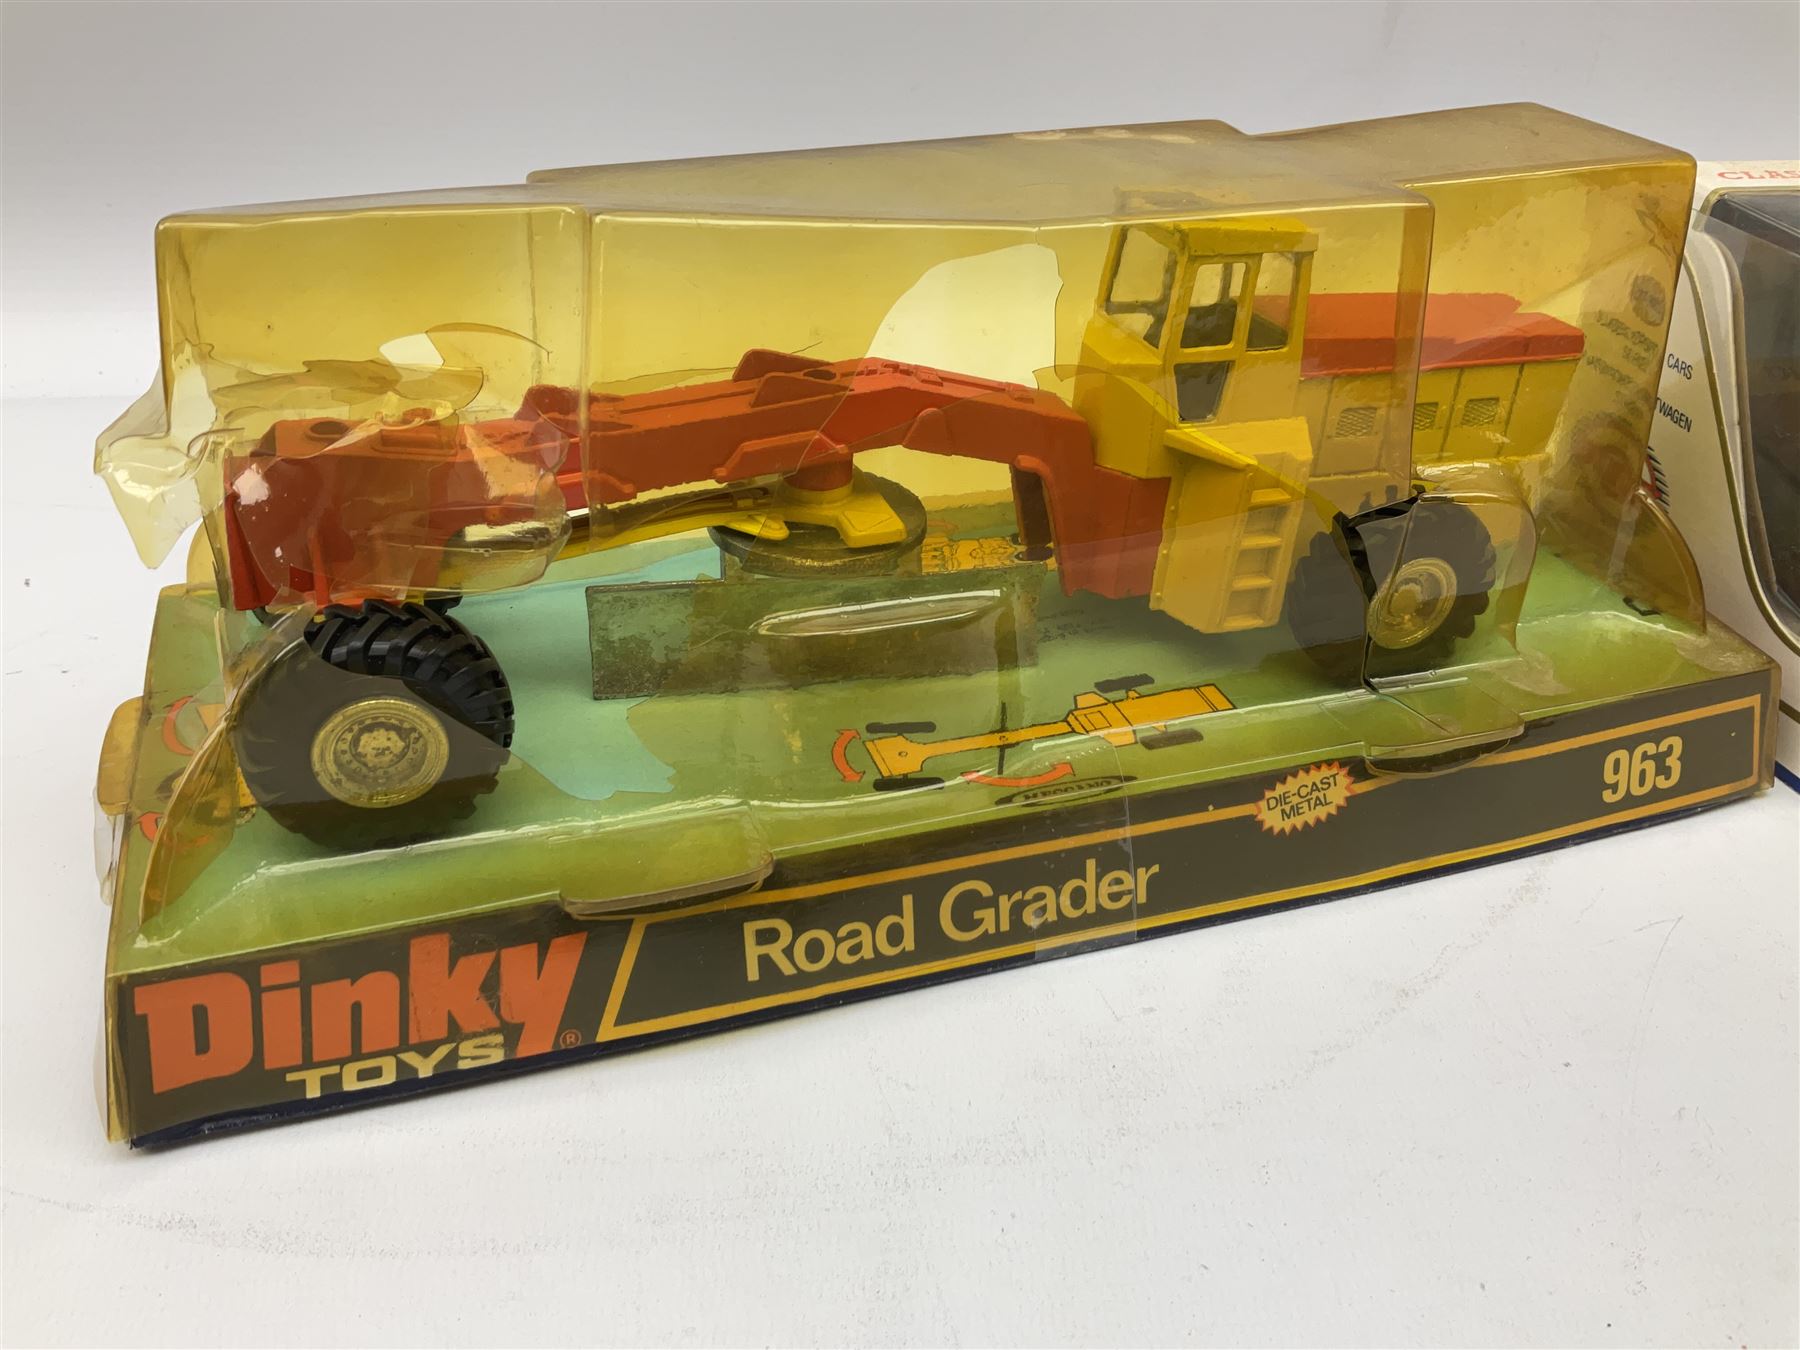 Dinky - Road Grader No.963; with blister box; Majorette Fire Engine No.3096; in window box; seven Ma - Image 6 of 12